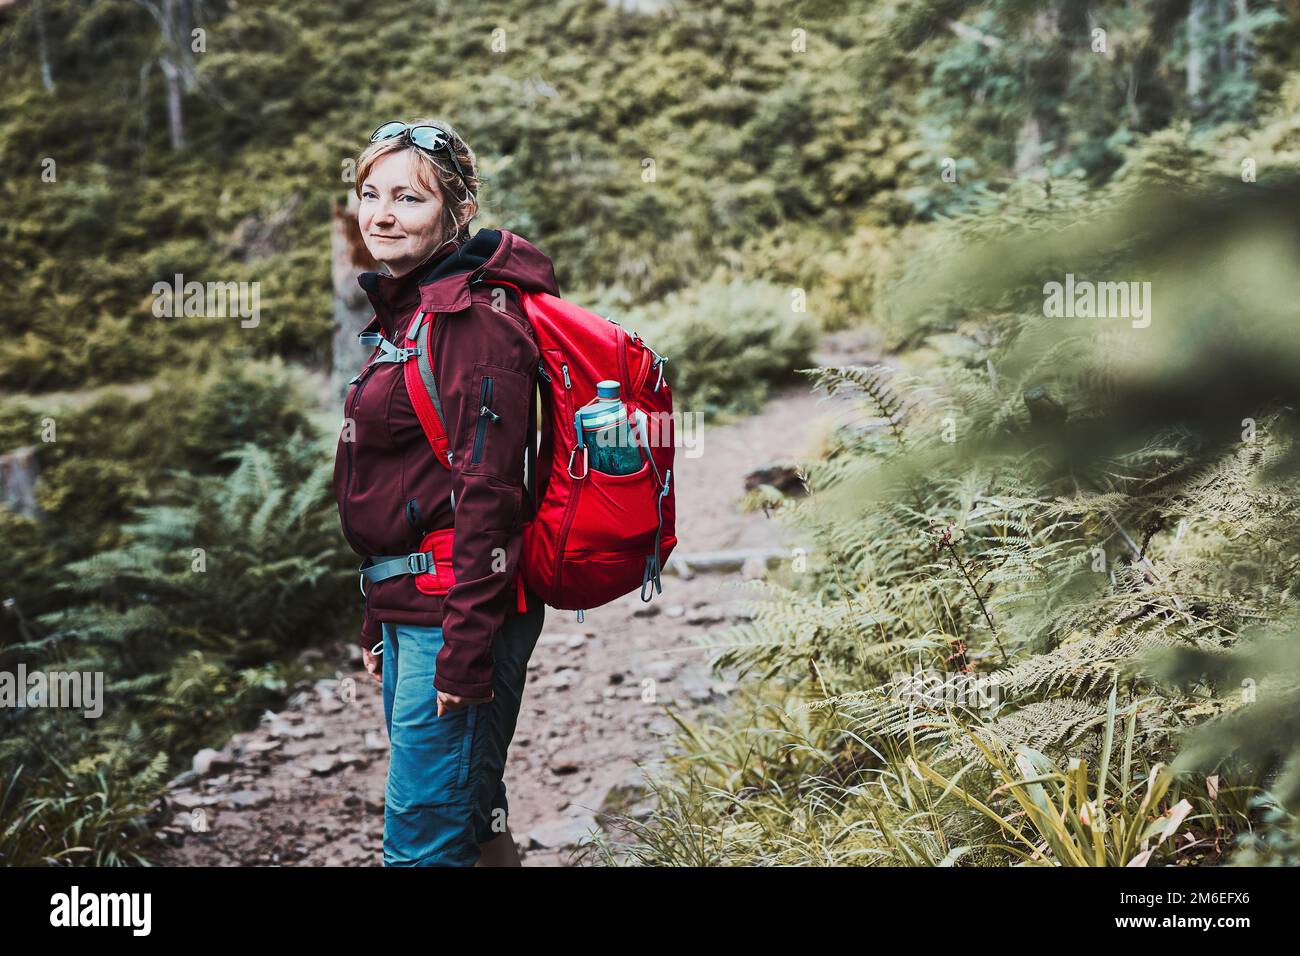 Woman with backpack hiking in mountains, spending summer vacation close to nature. Woman walking on path among bushes and trees Stock Photo